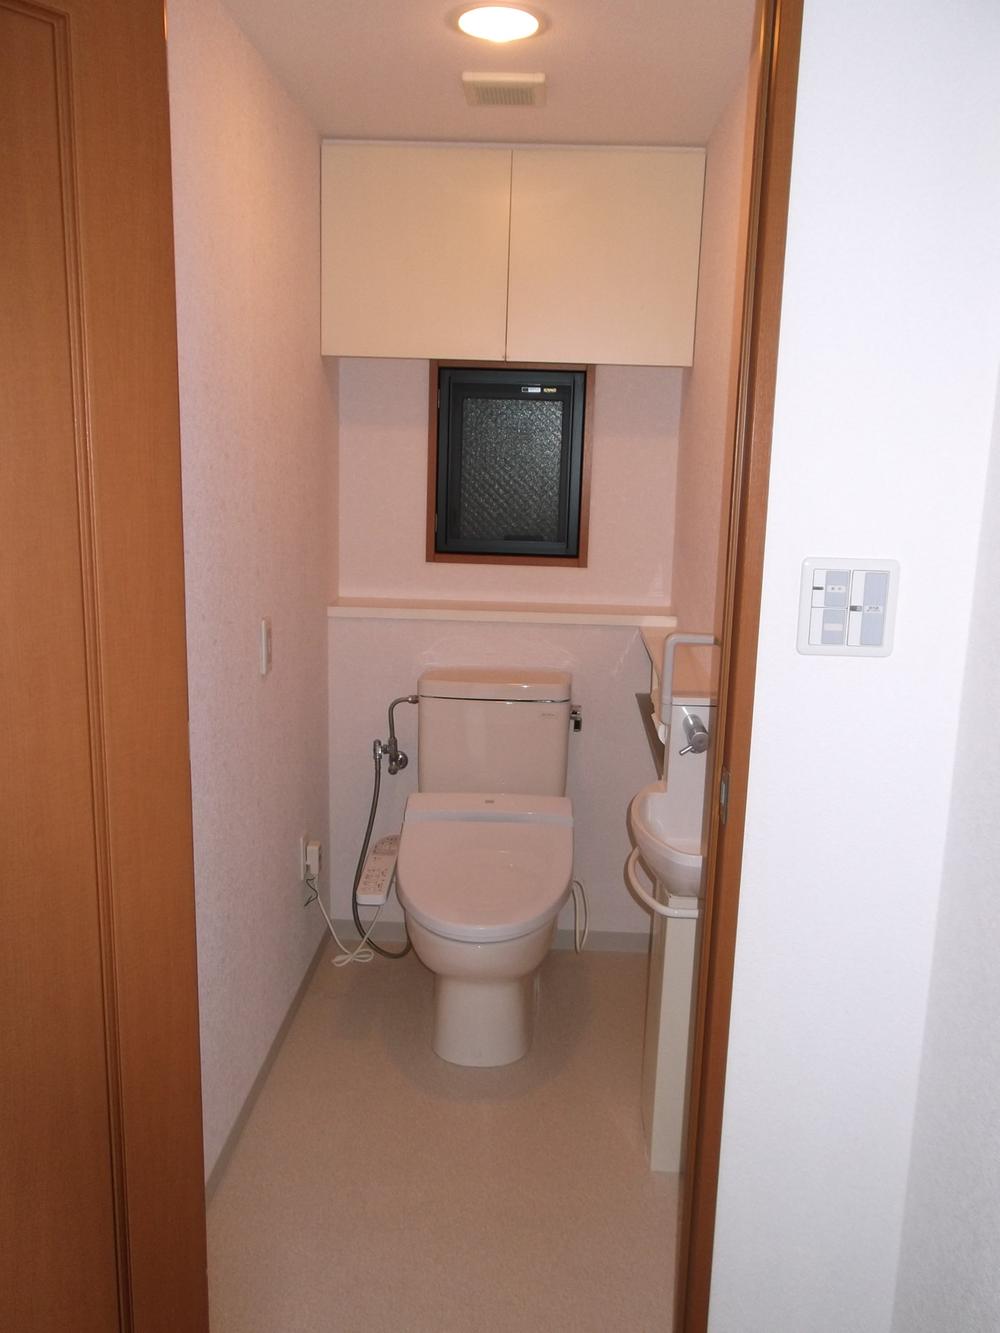 Toilet. Toilet. Also there is a window in the toilet